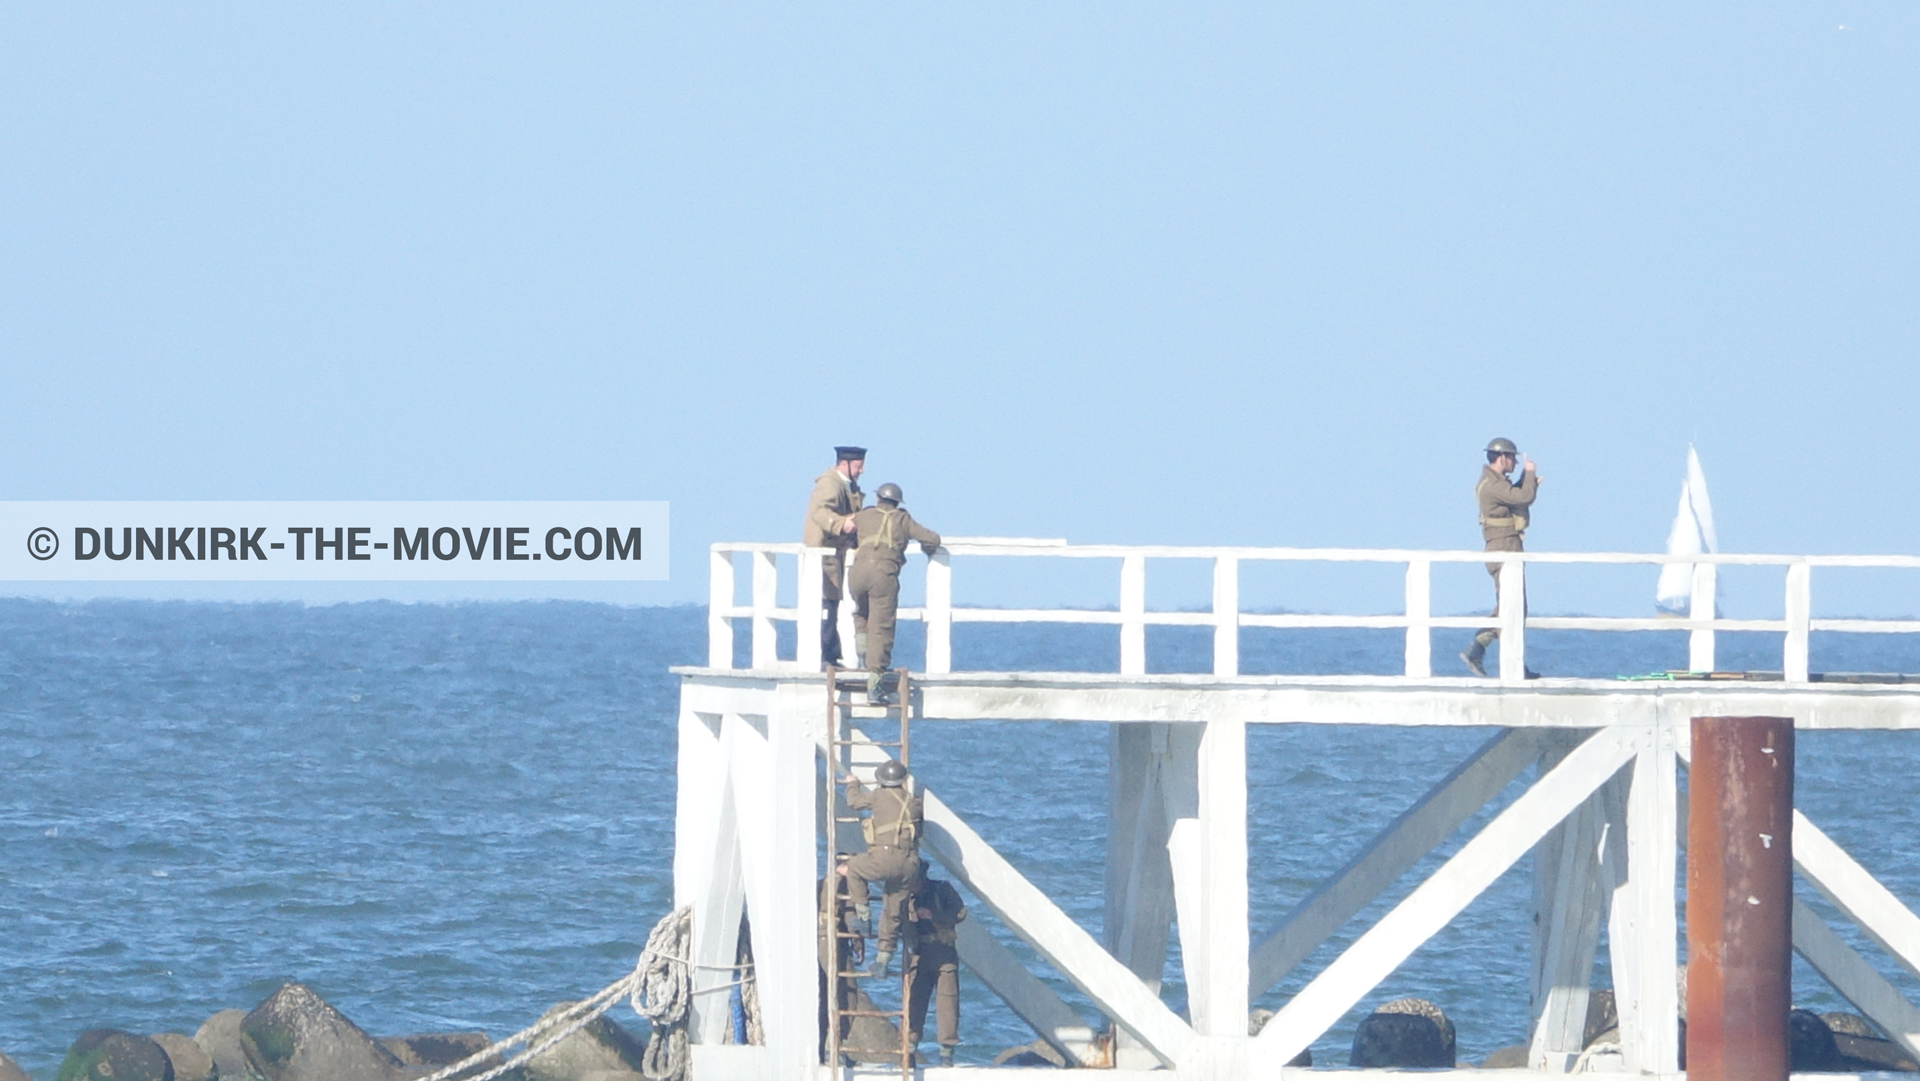 Picture with actor, blue sky, supernumeraries, EST pier,  from behind the scene of the Dunkirk movie by Nolan